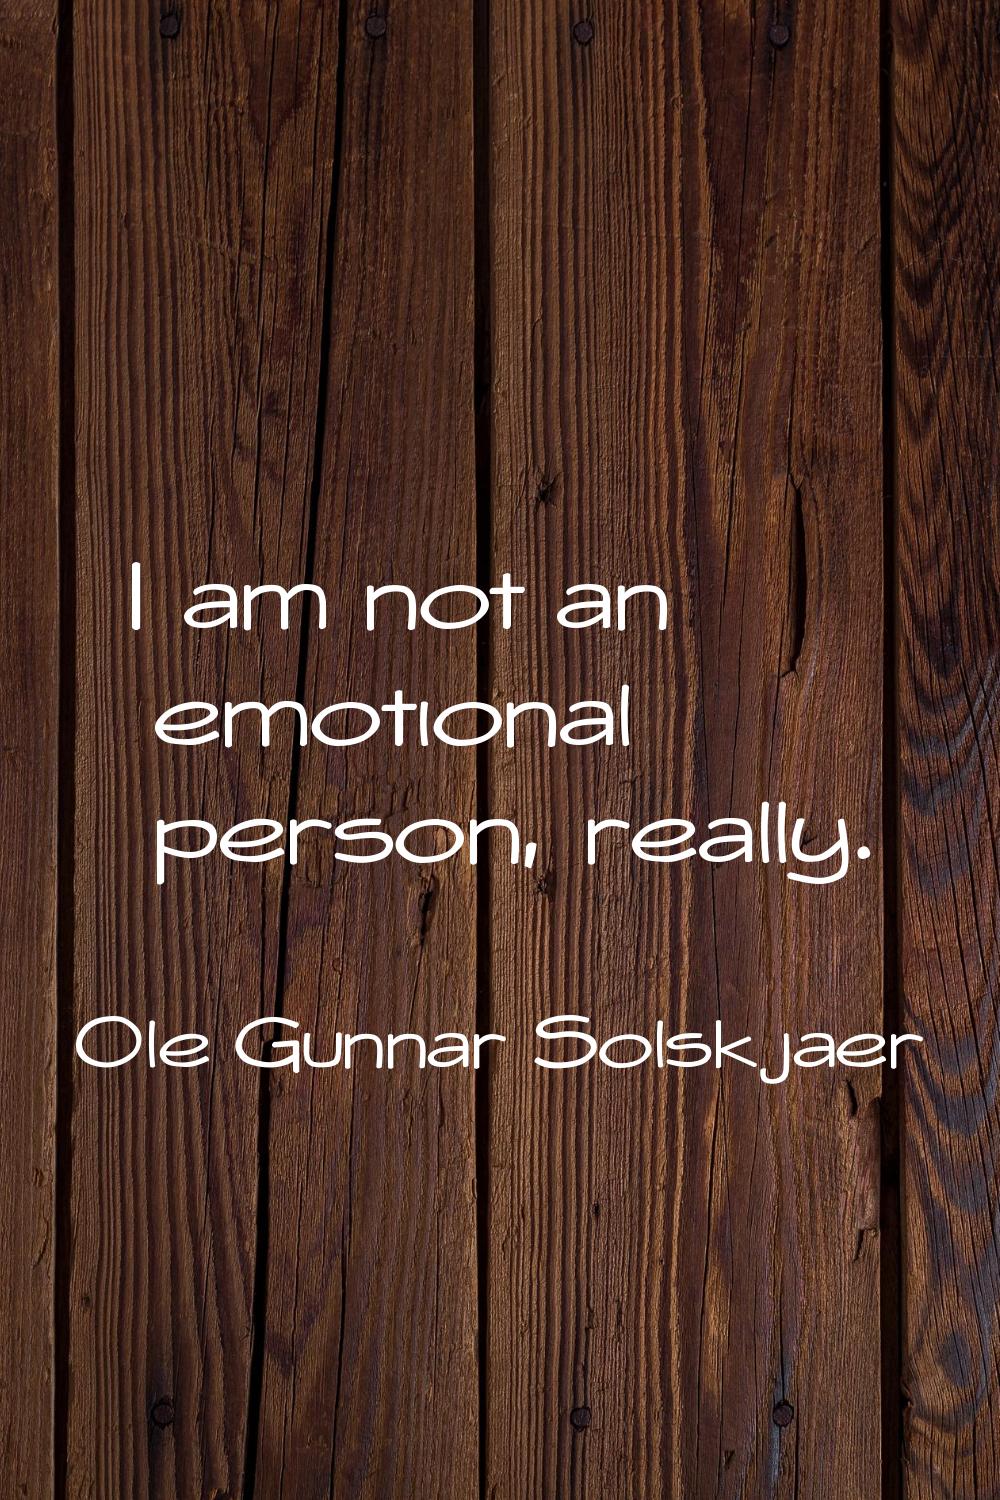 I am not an emotional person, really.